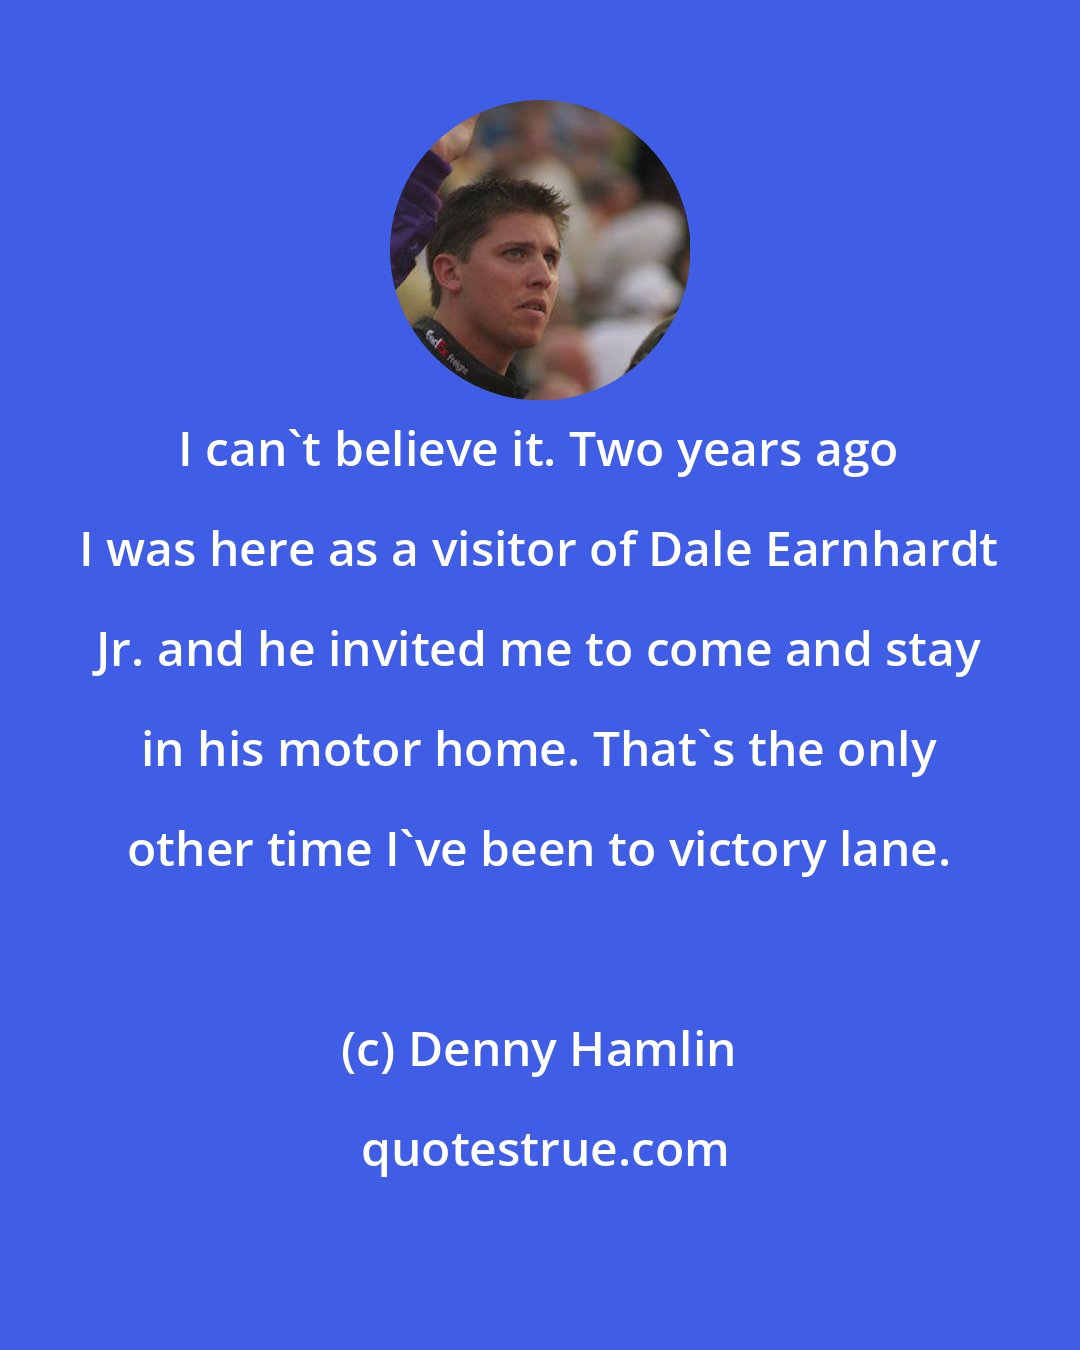 Denny Hamlin: I can't believe it. Two years ago I was here as a visitor of Dale Earnhardt Jr. and he invited me to come and stay in his motor home. That's the only other time I've been to victory lane.